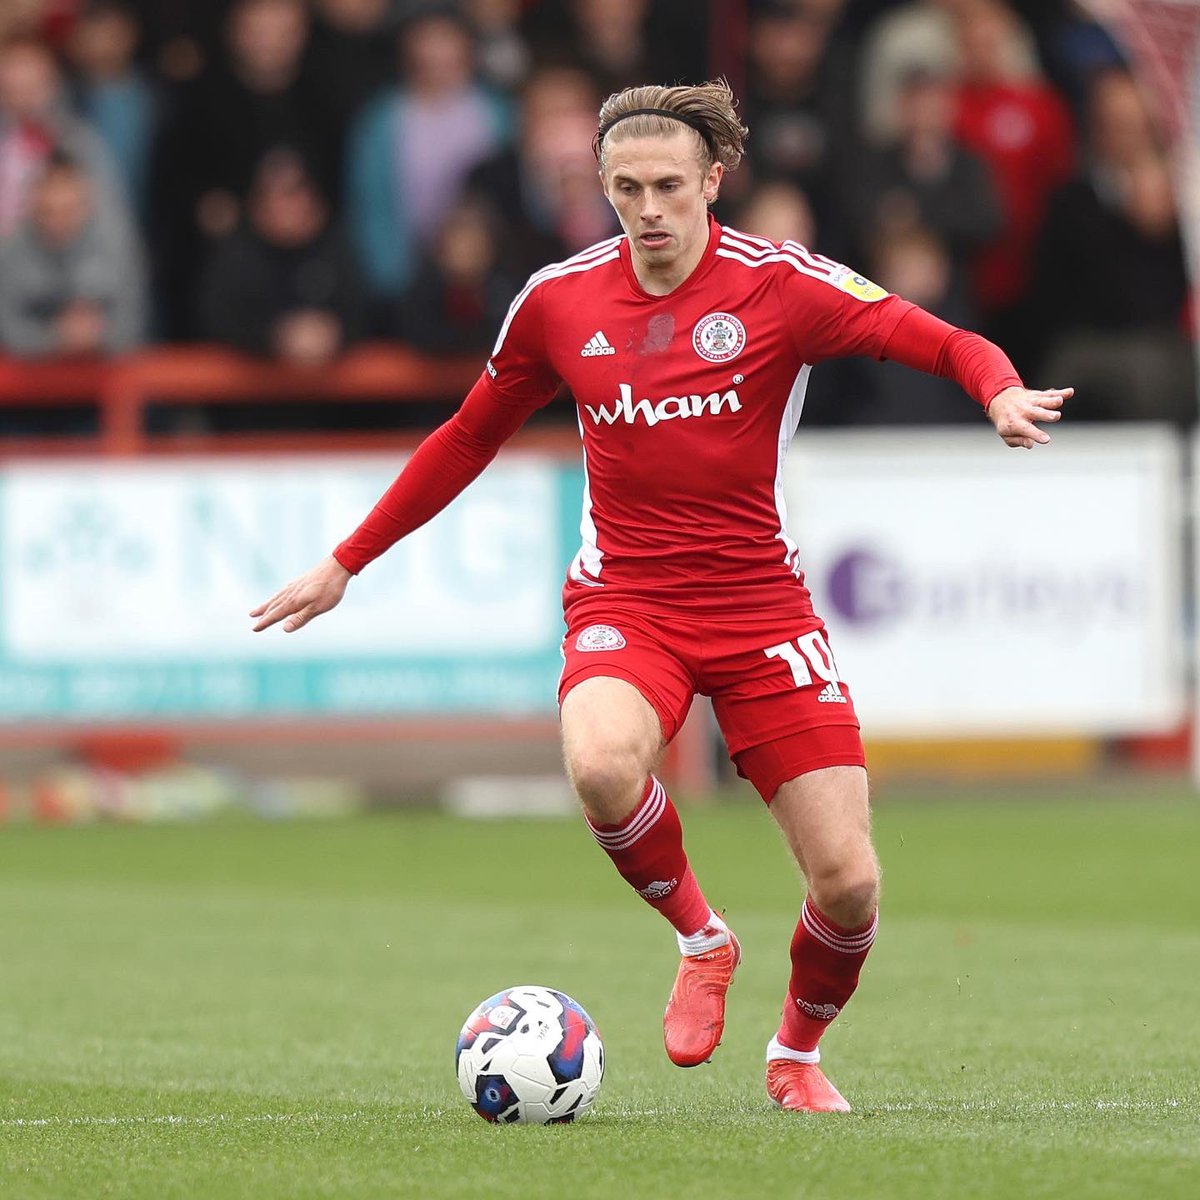 🚨✍️| Tranmere Rovers have held talks with 27 year old Accrington Stanley midfielder Joe Pritchard. Doncaster Rovers have also shown interest. Both parties have put deals on the table.

📰| Source - @efl_hub

#TRFC | #SWA